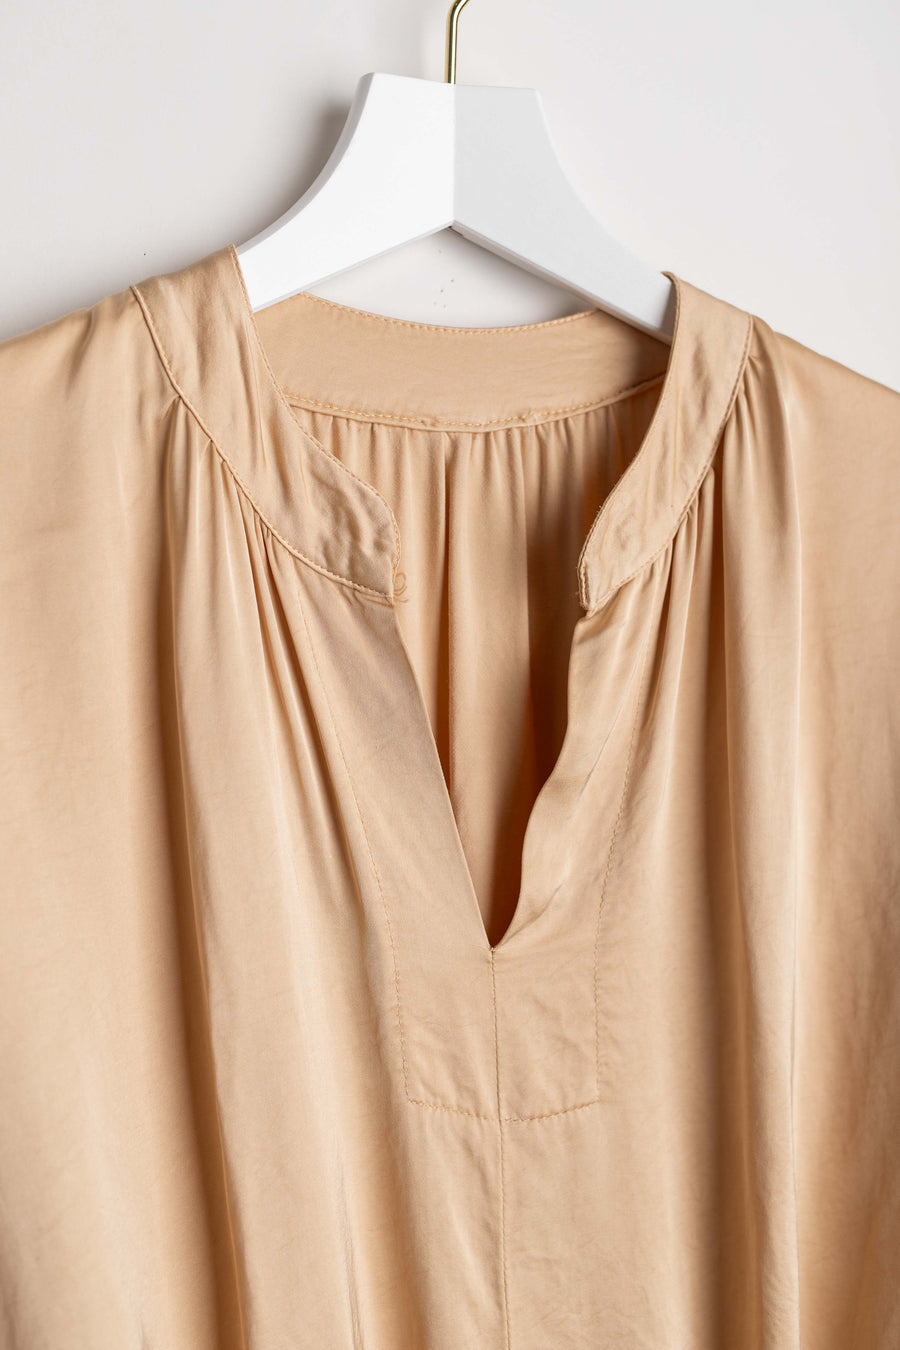 jackieandkate Top cropped Satin beige